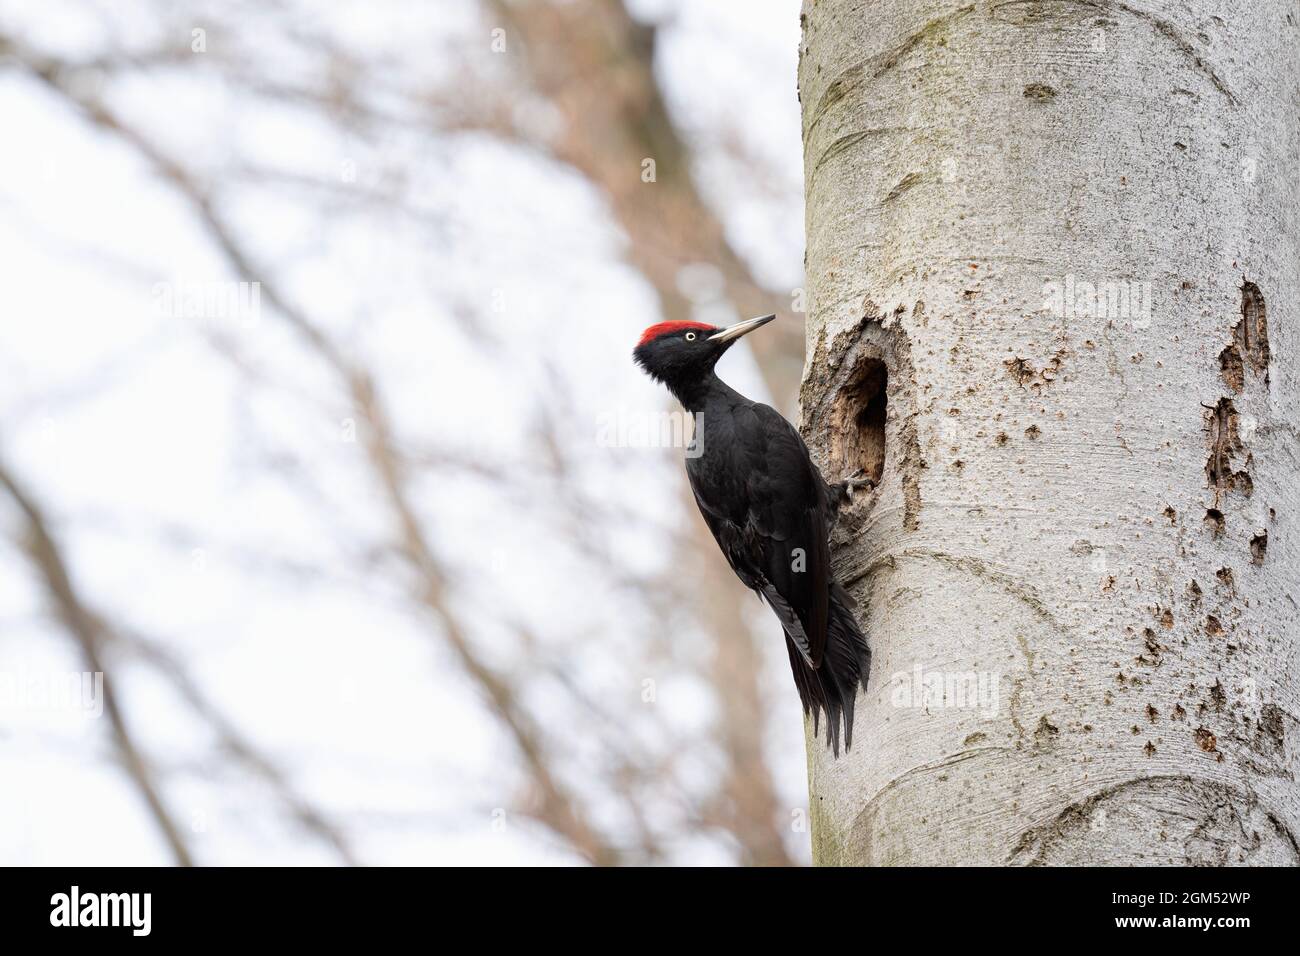 Black woodpecker in the forest. Woodpecker built nest during spring. European wildlife. Stock Photo